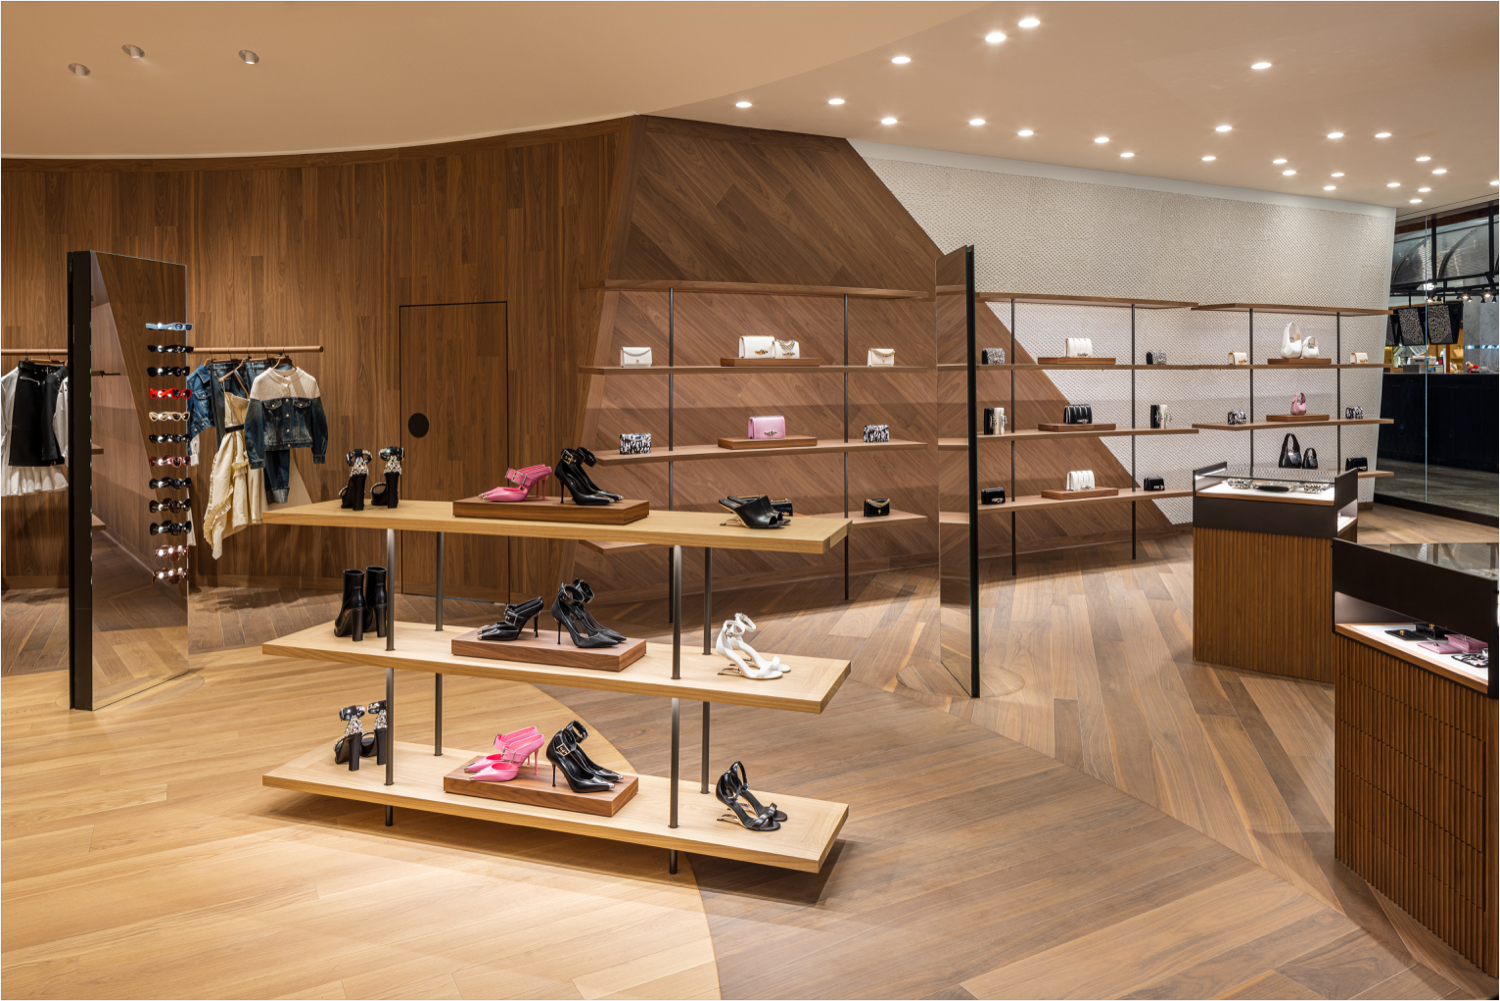 Alexander McQueen's new store opens at Elements